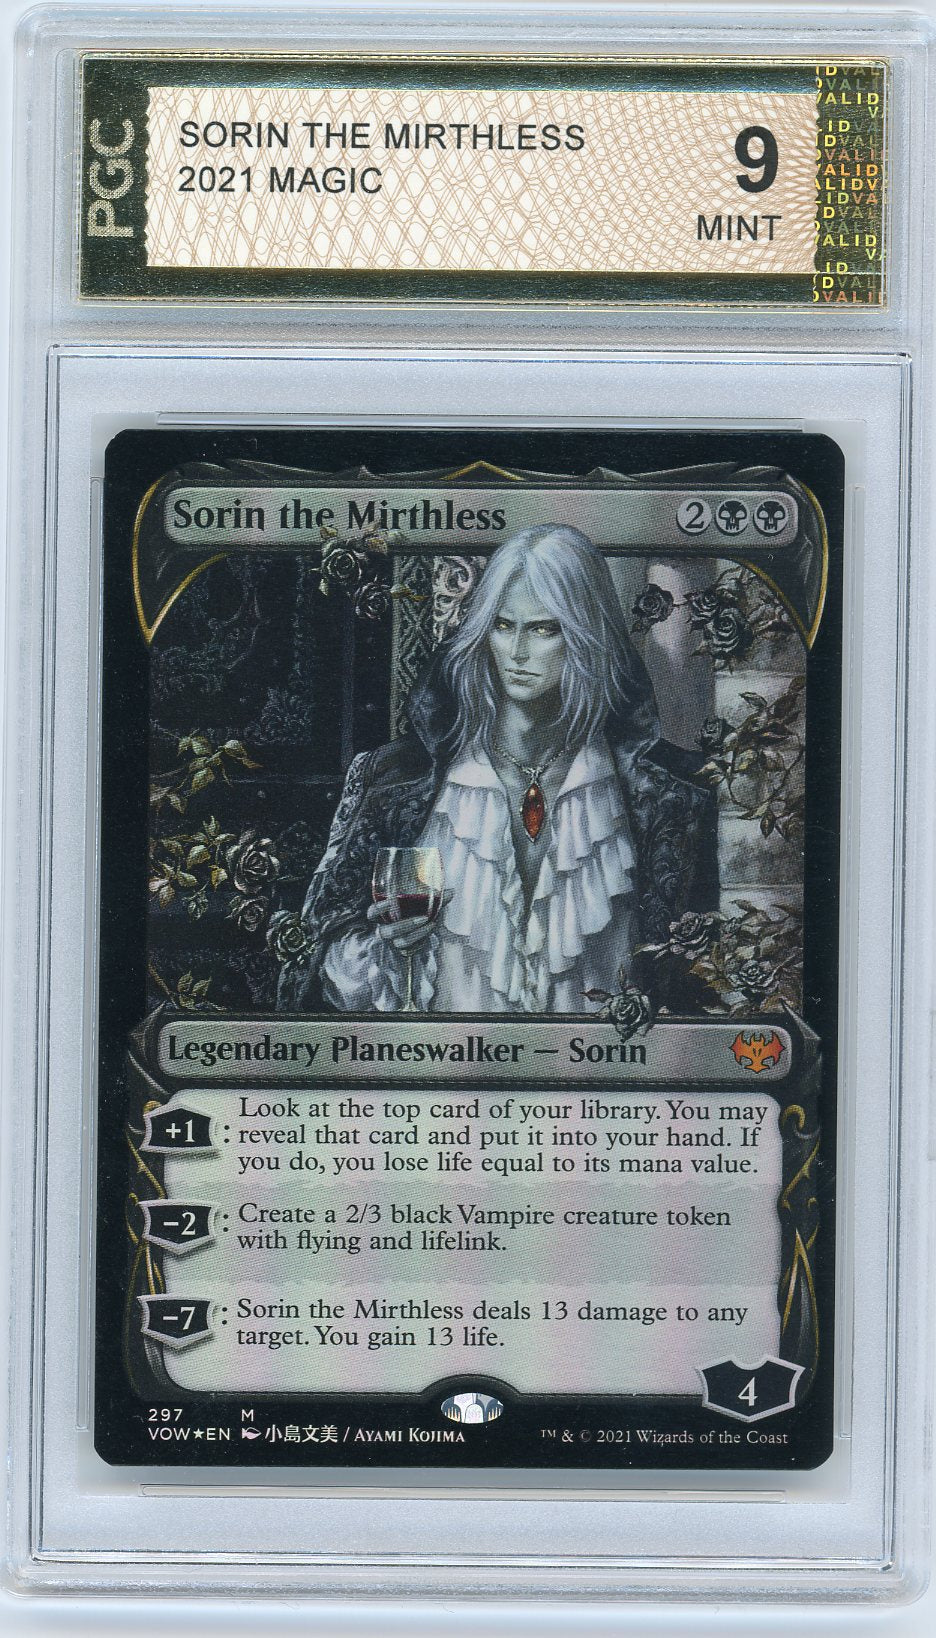 SORIN THE MIRTHLESS